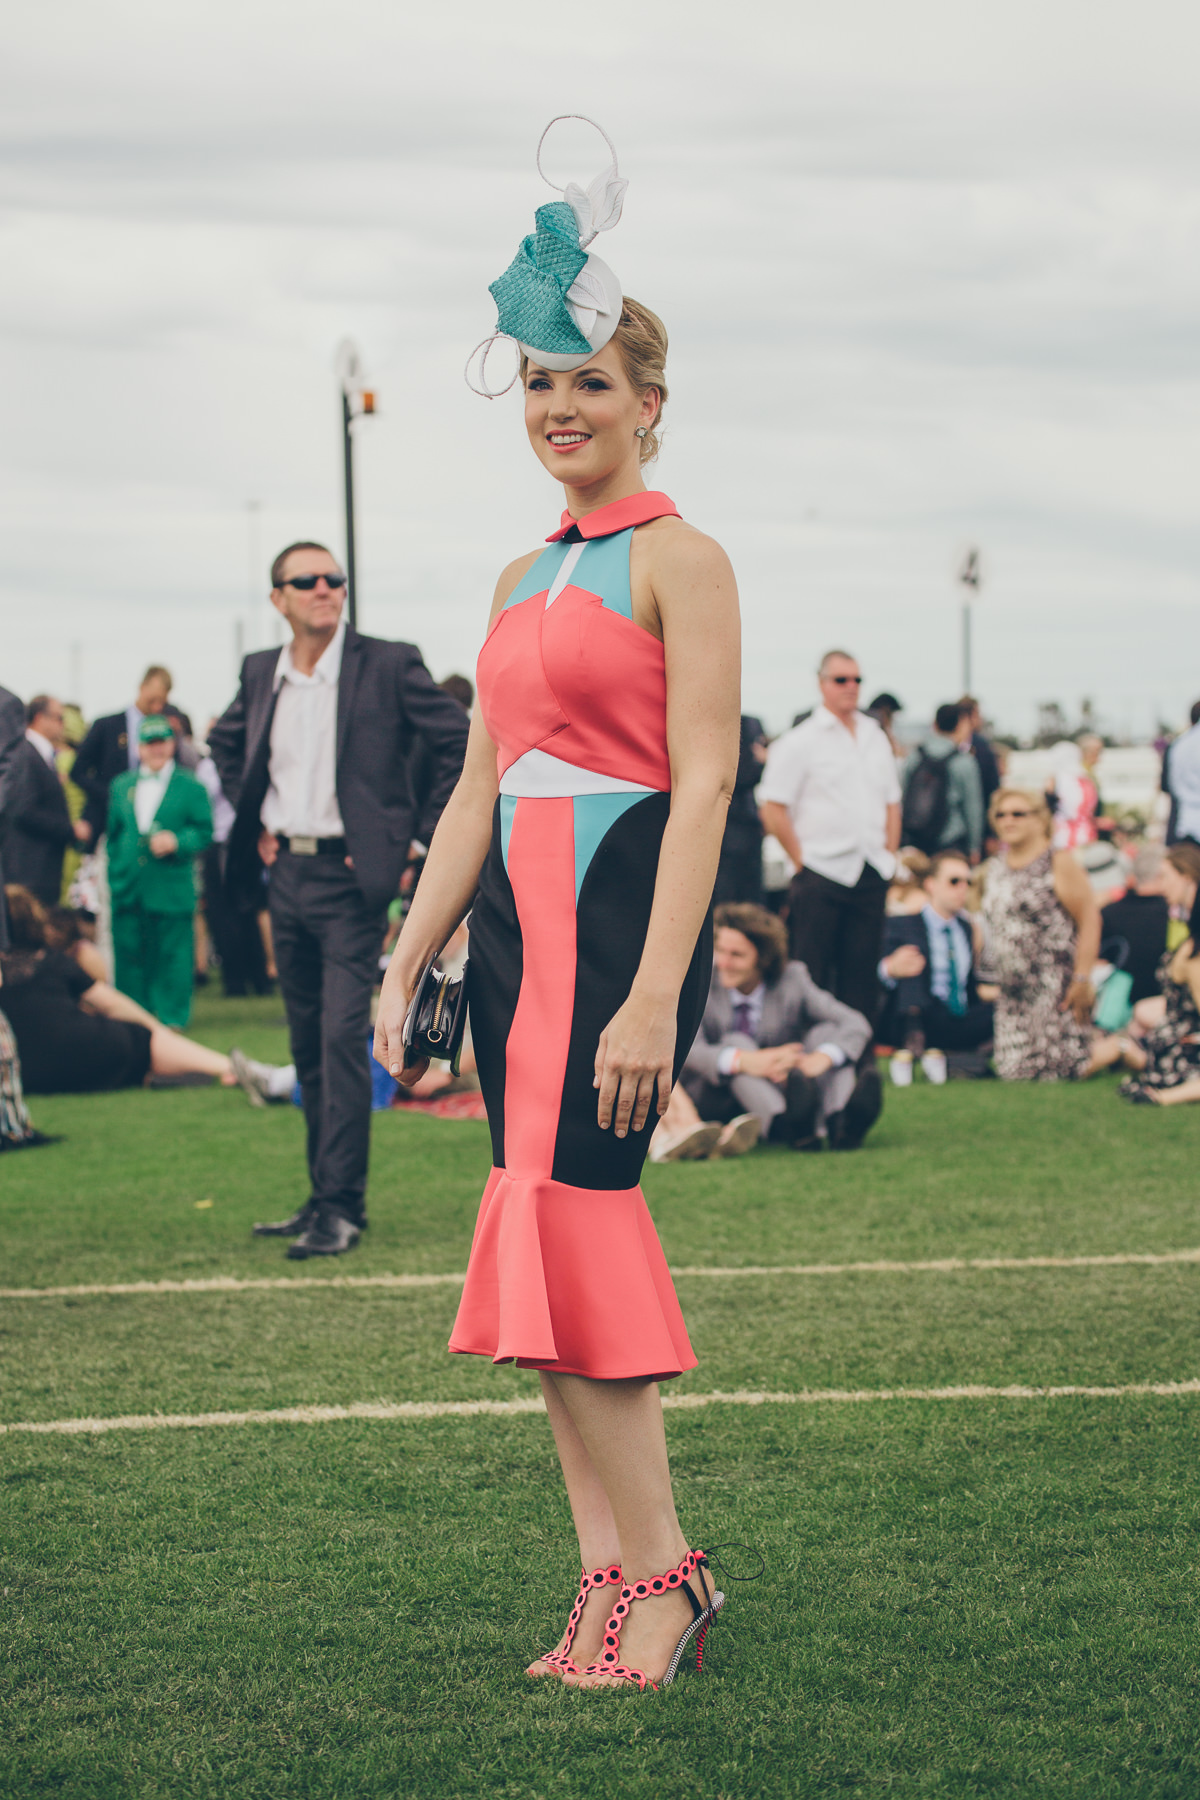 racing fashion in melbourne